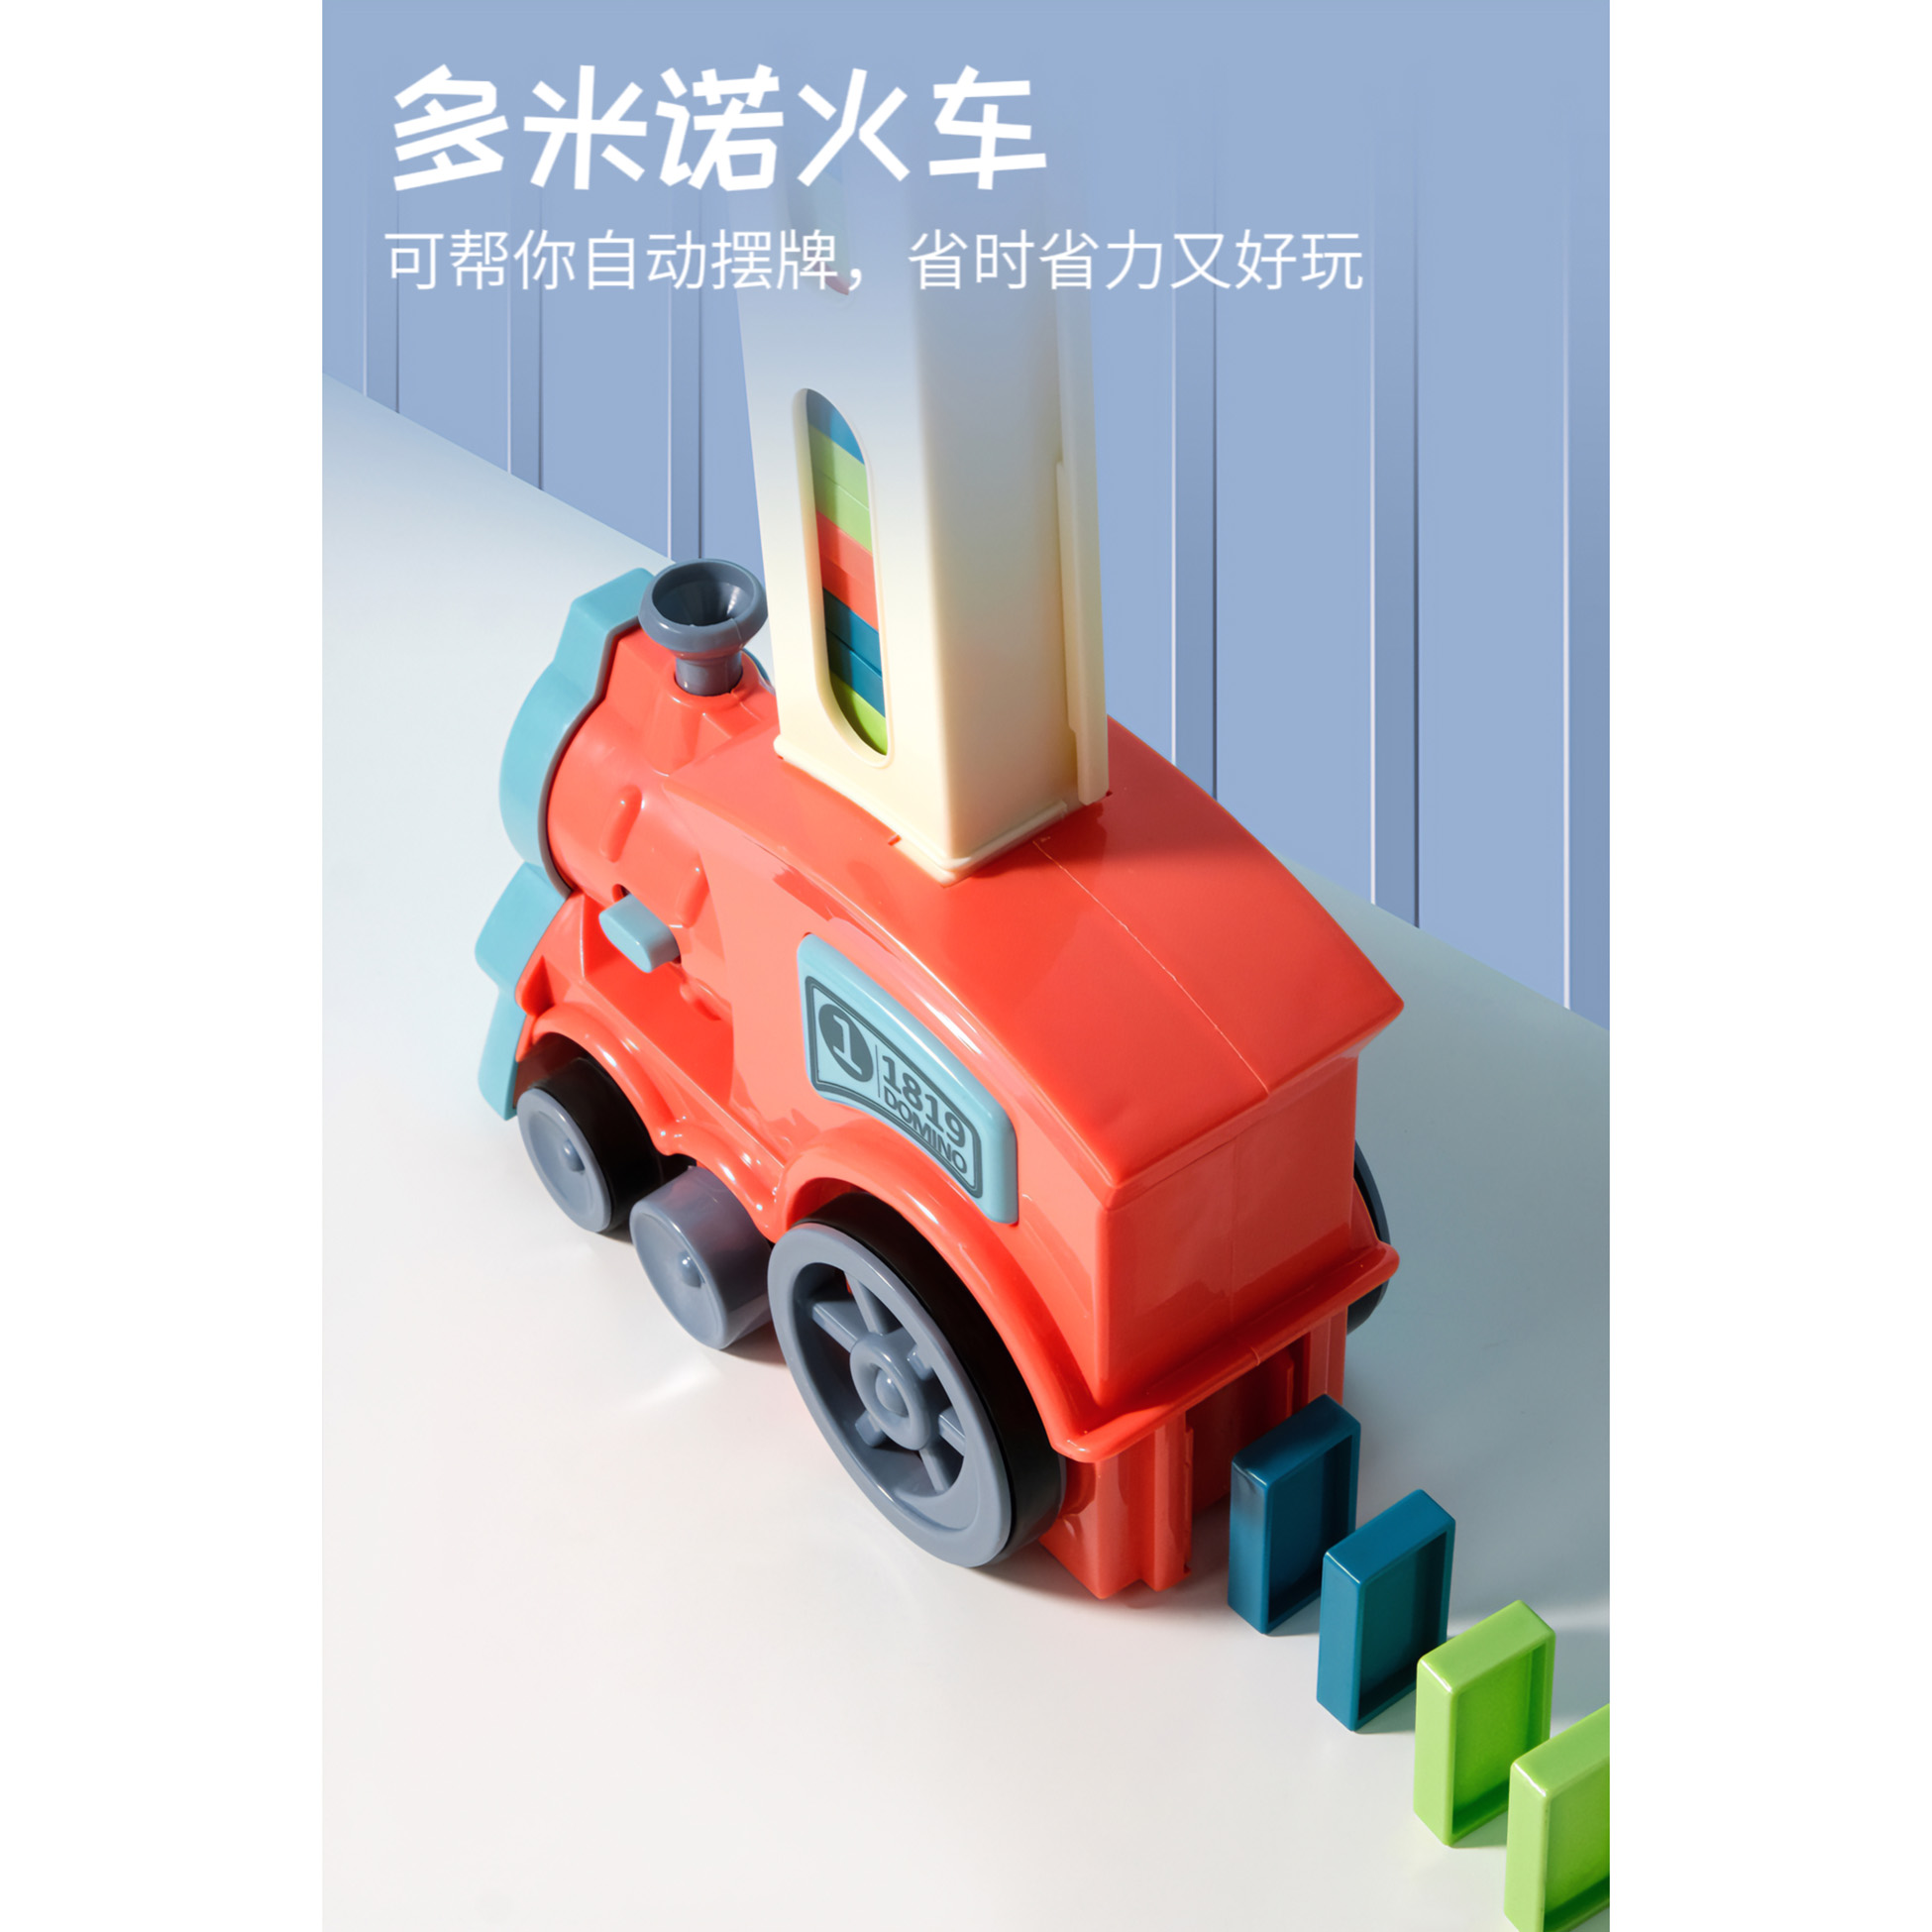 Dominoes' new online red fun automatically put on electric train-Taobao